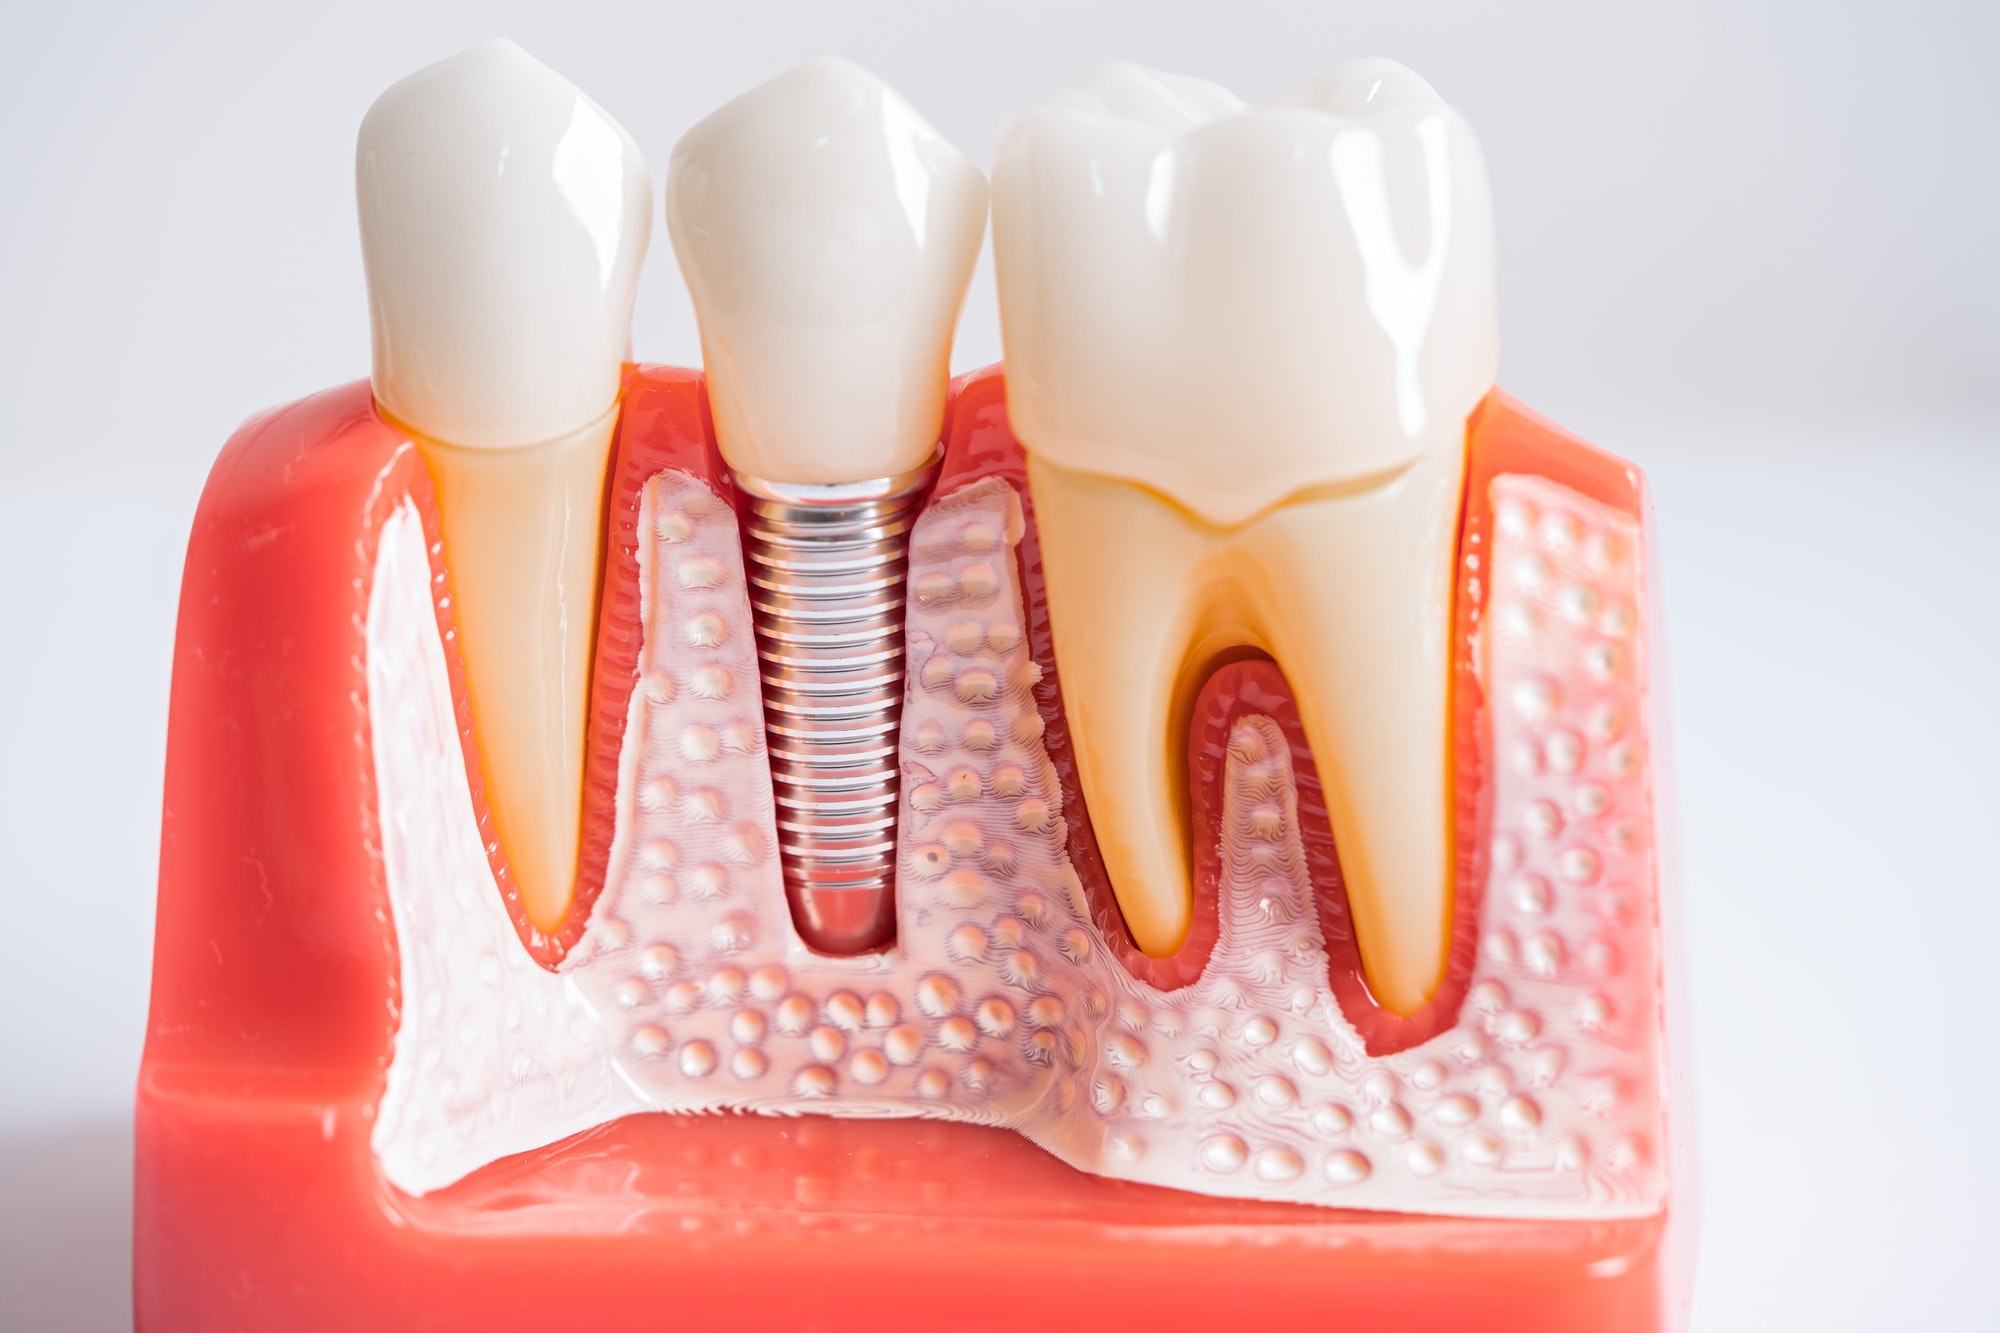 Dental implant, artificial tooth roots into jaw, root canal of dental treatment, gum disease